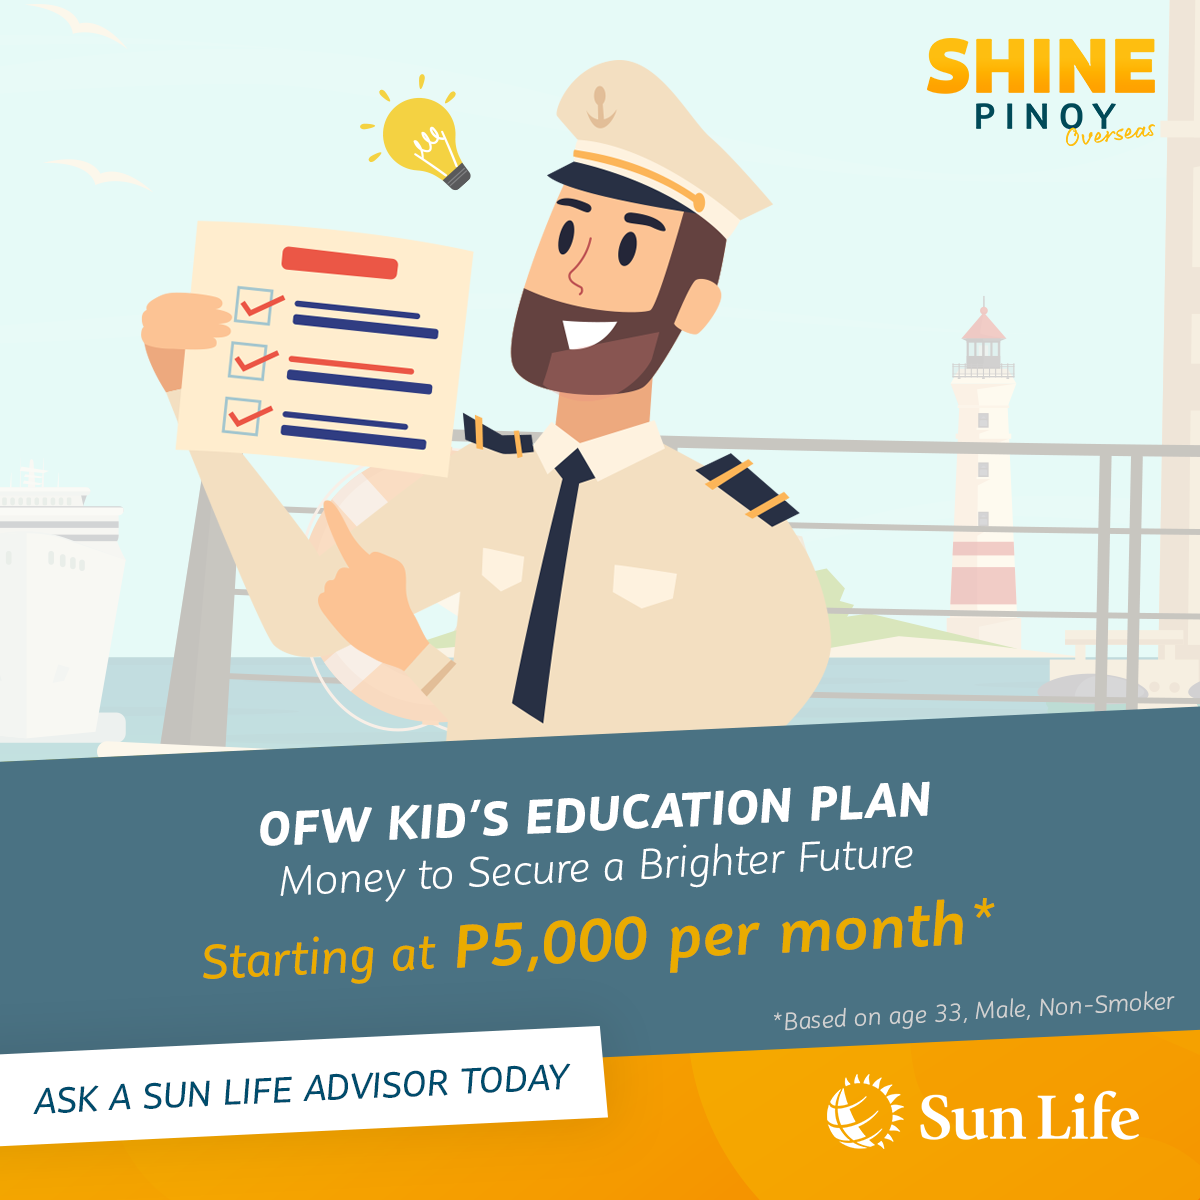 OFW Kid’s Education Plan | Shine Pinoy Insurance for OFW